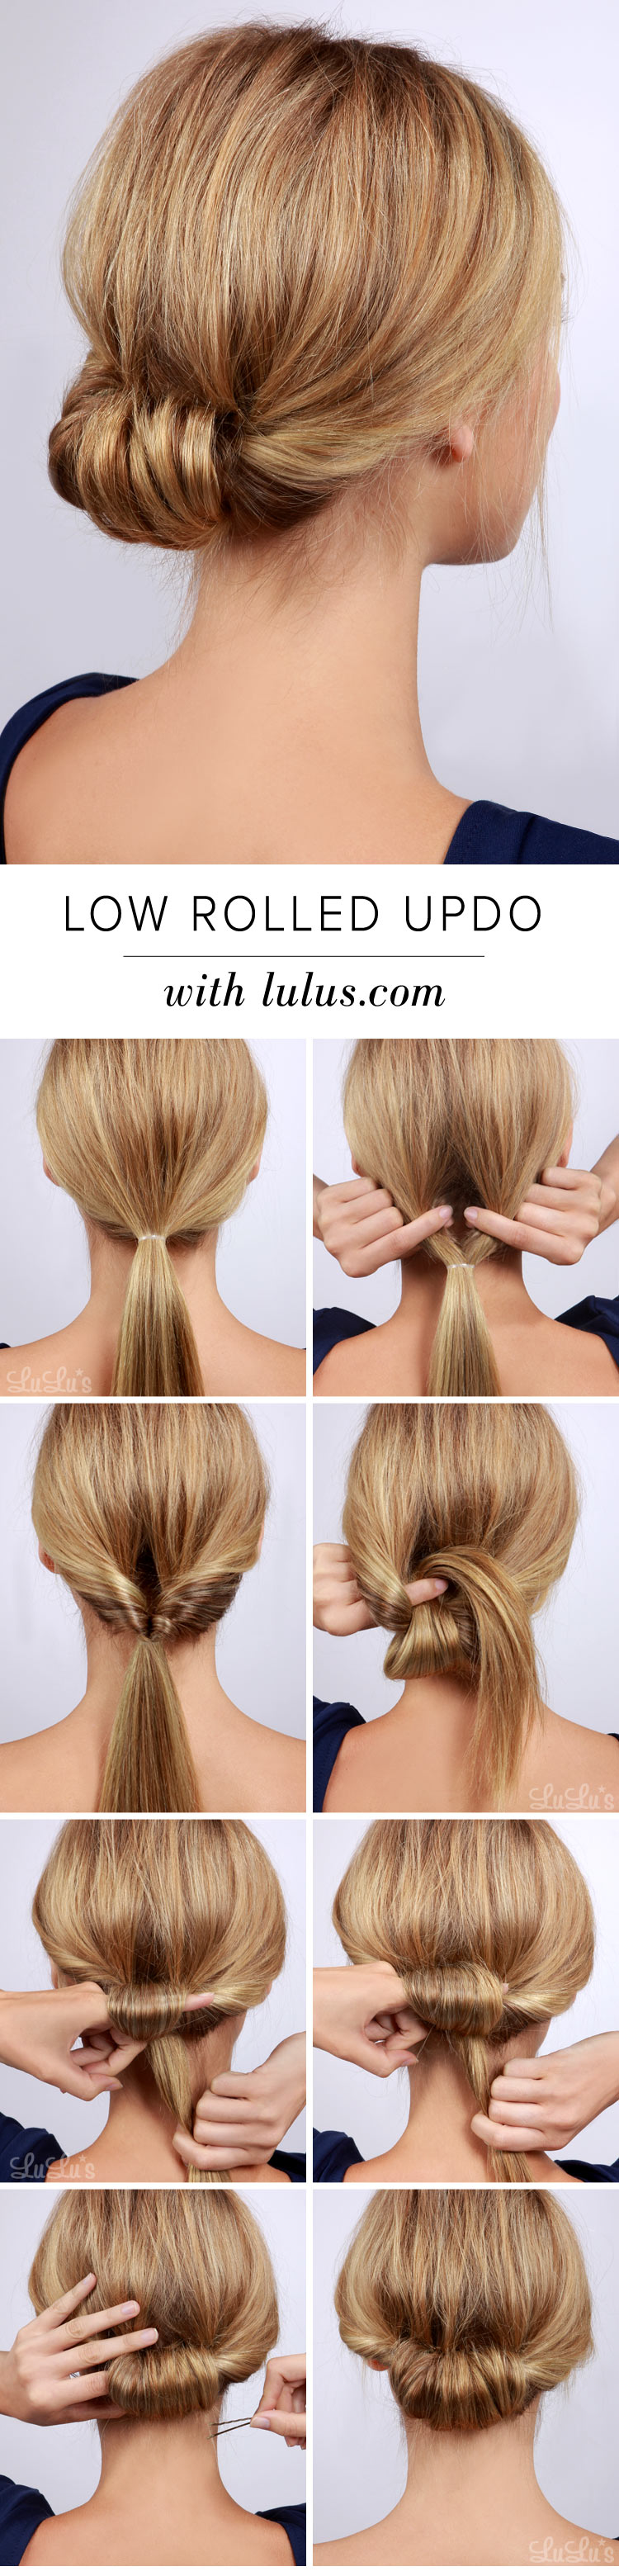 5 Minute Step By Step Hair Tutorials For The Busy Ladies